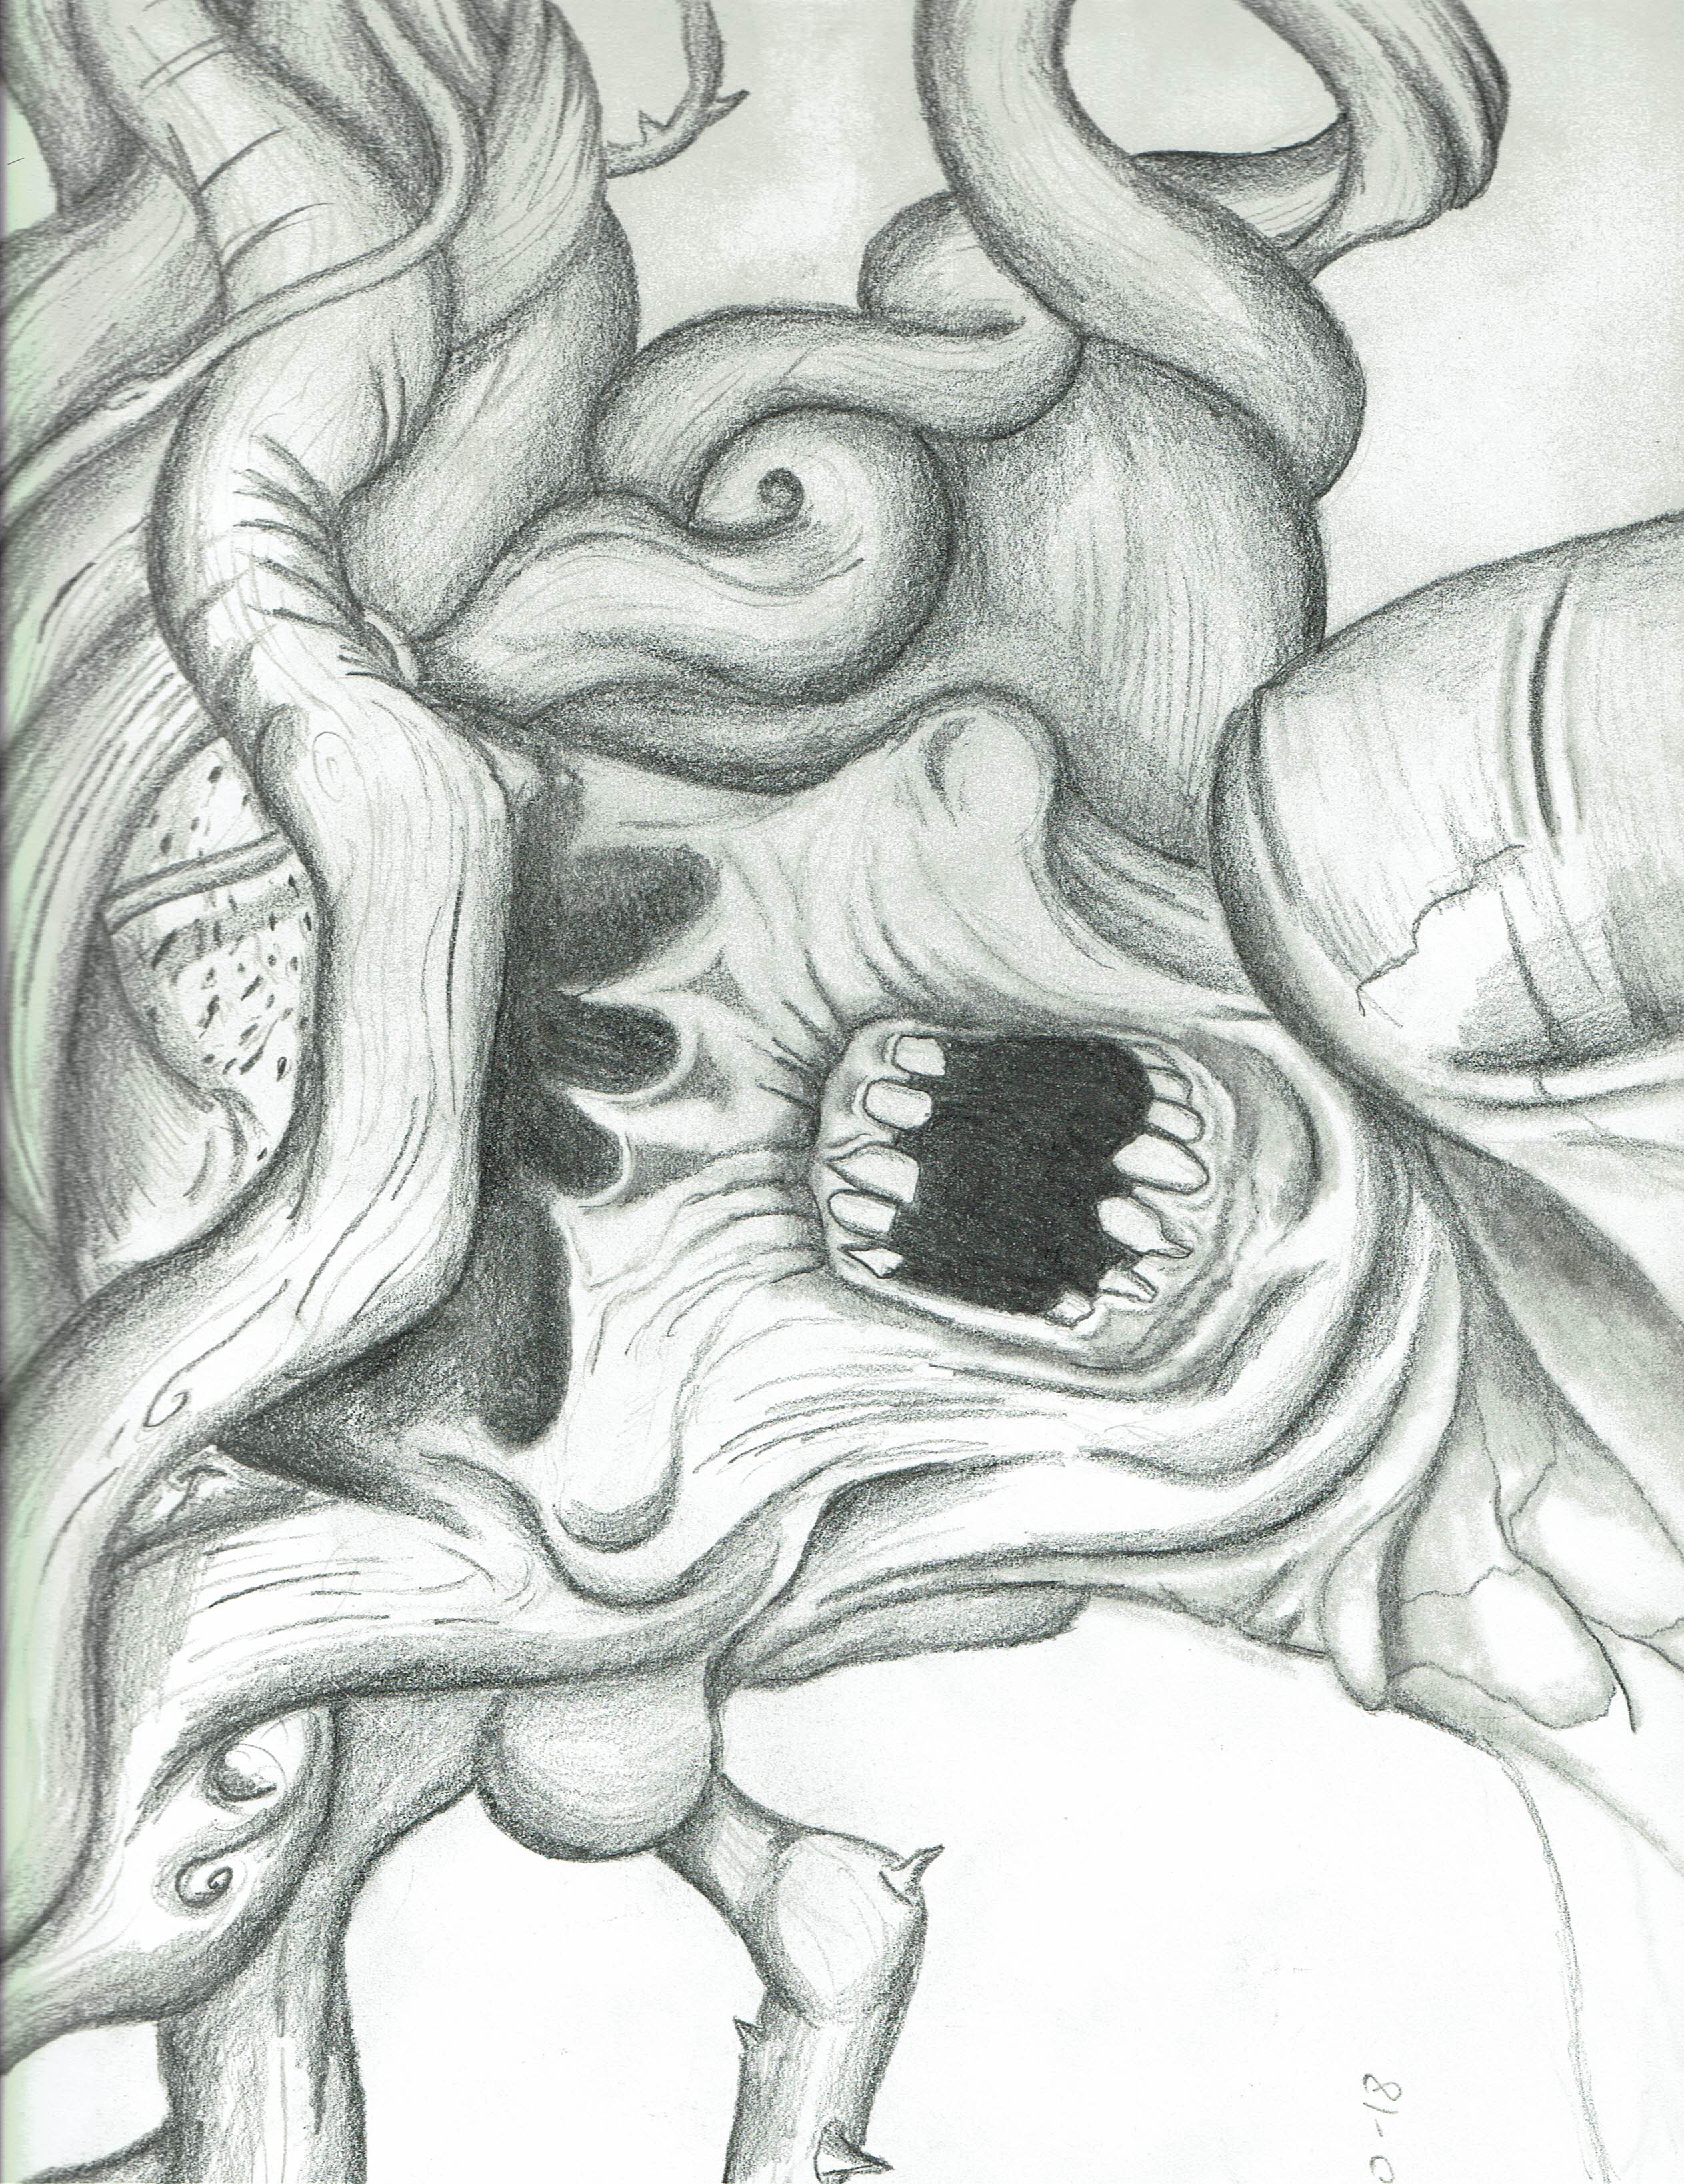 A drawing of a close-up of a fictional monster